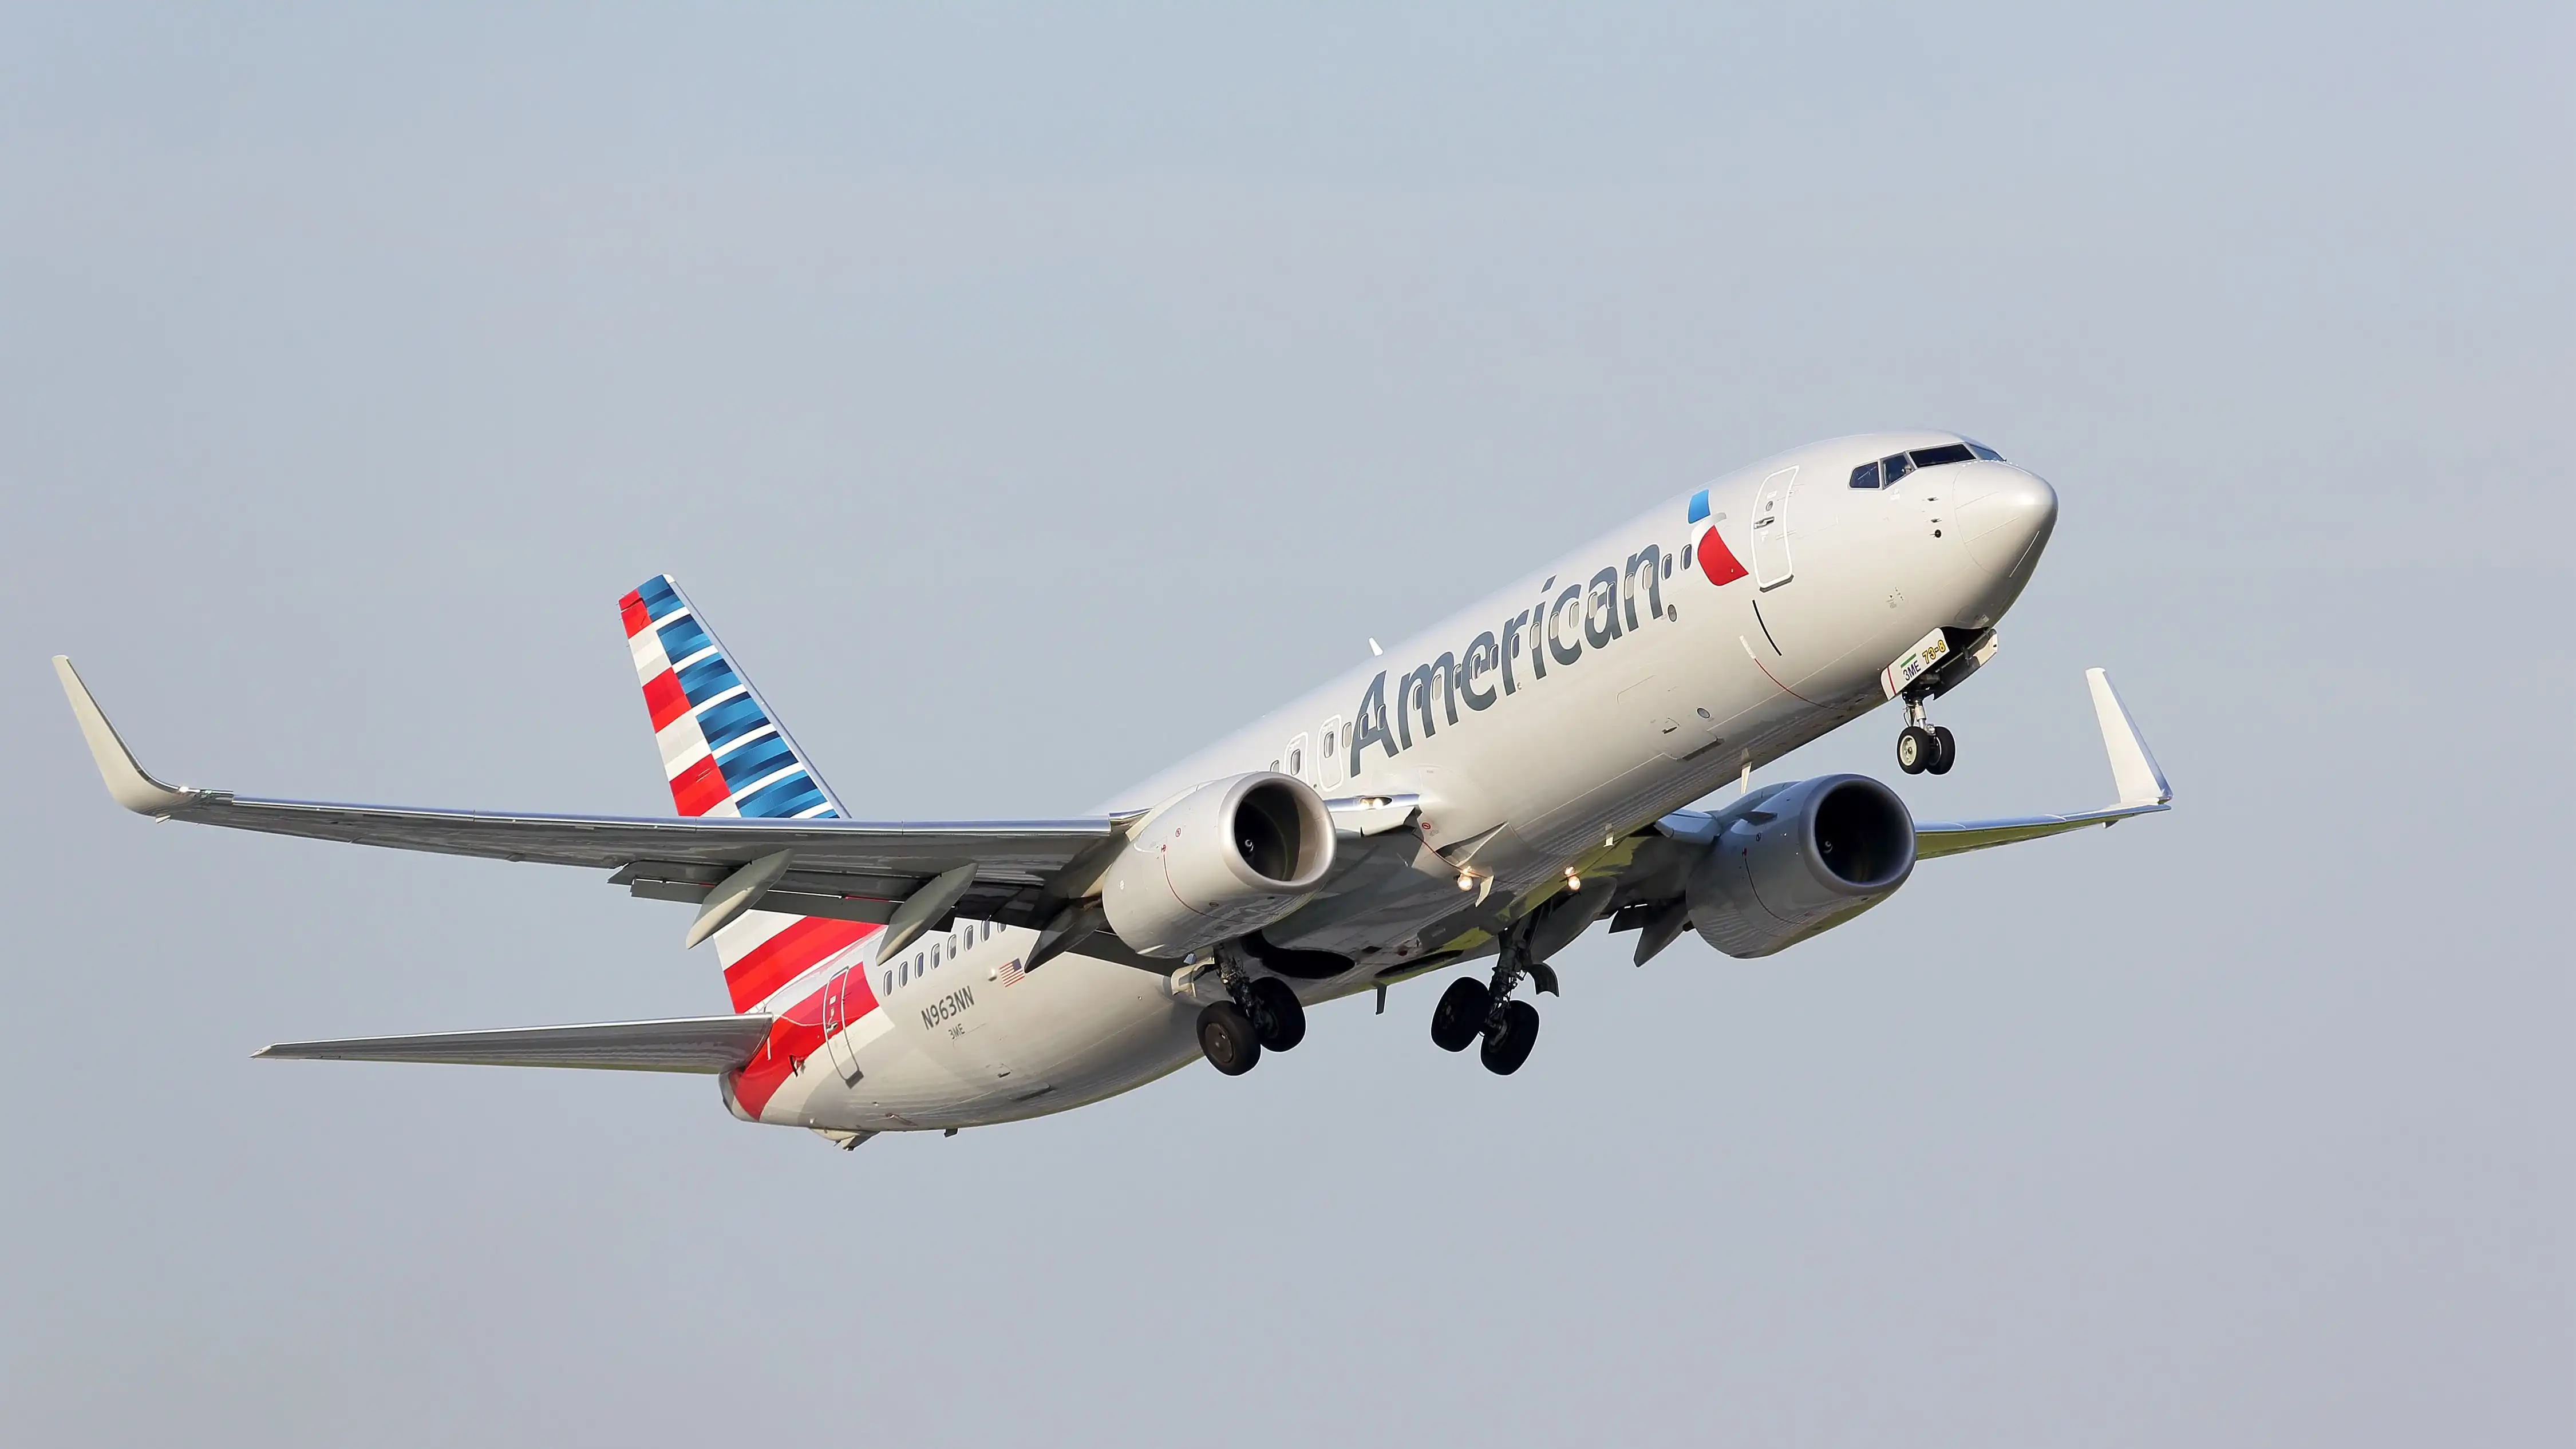 American Airlines Boeing 737-800 Dislodges From Gate Due To Severe Weather At Dallas Fort Worth International Airport